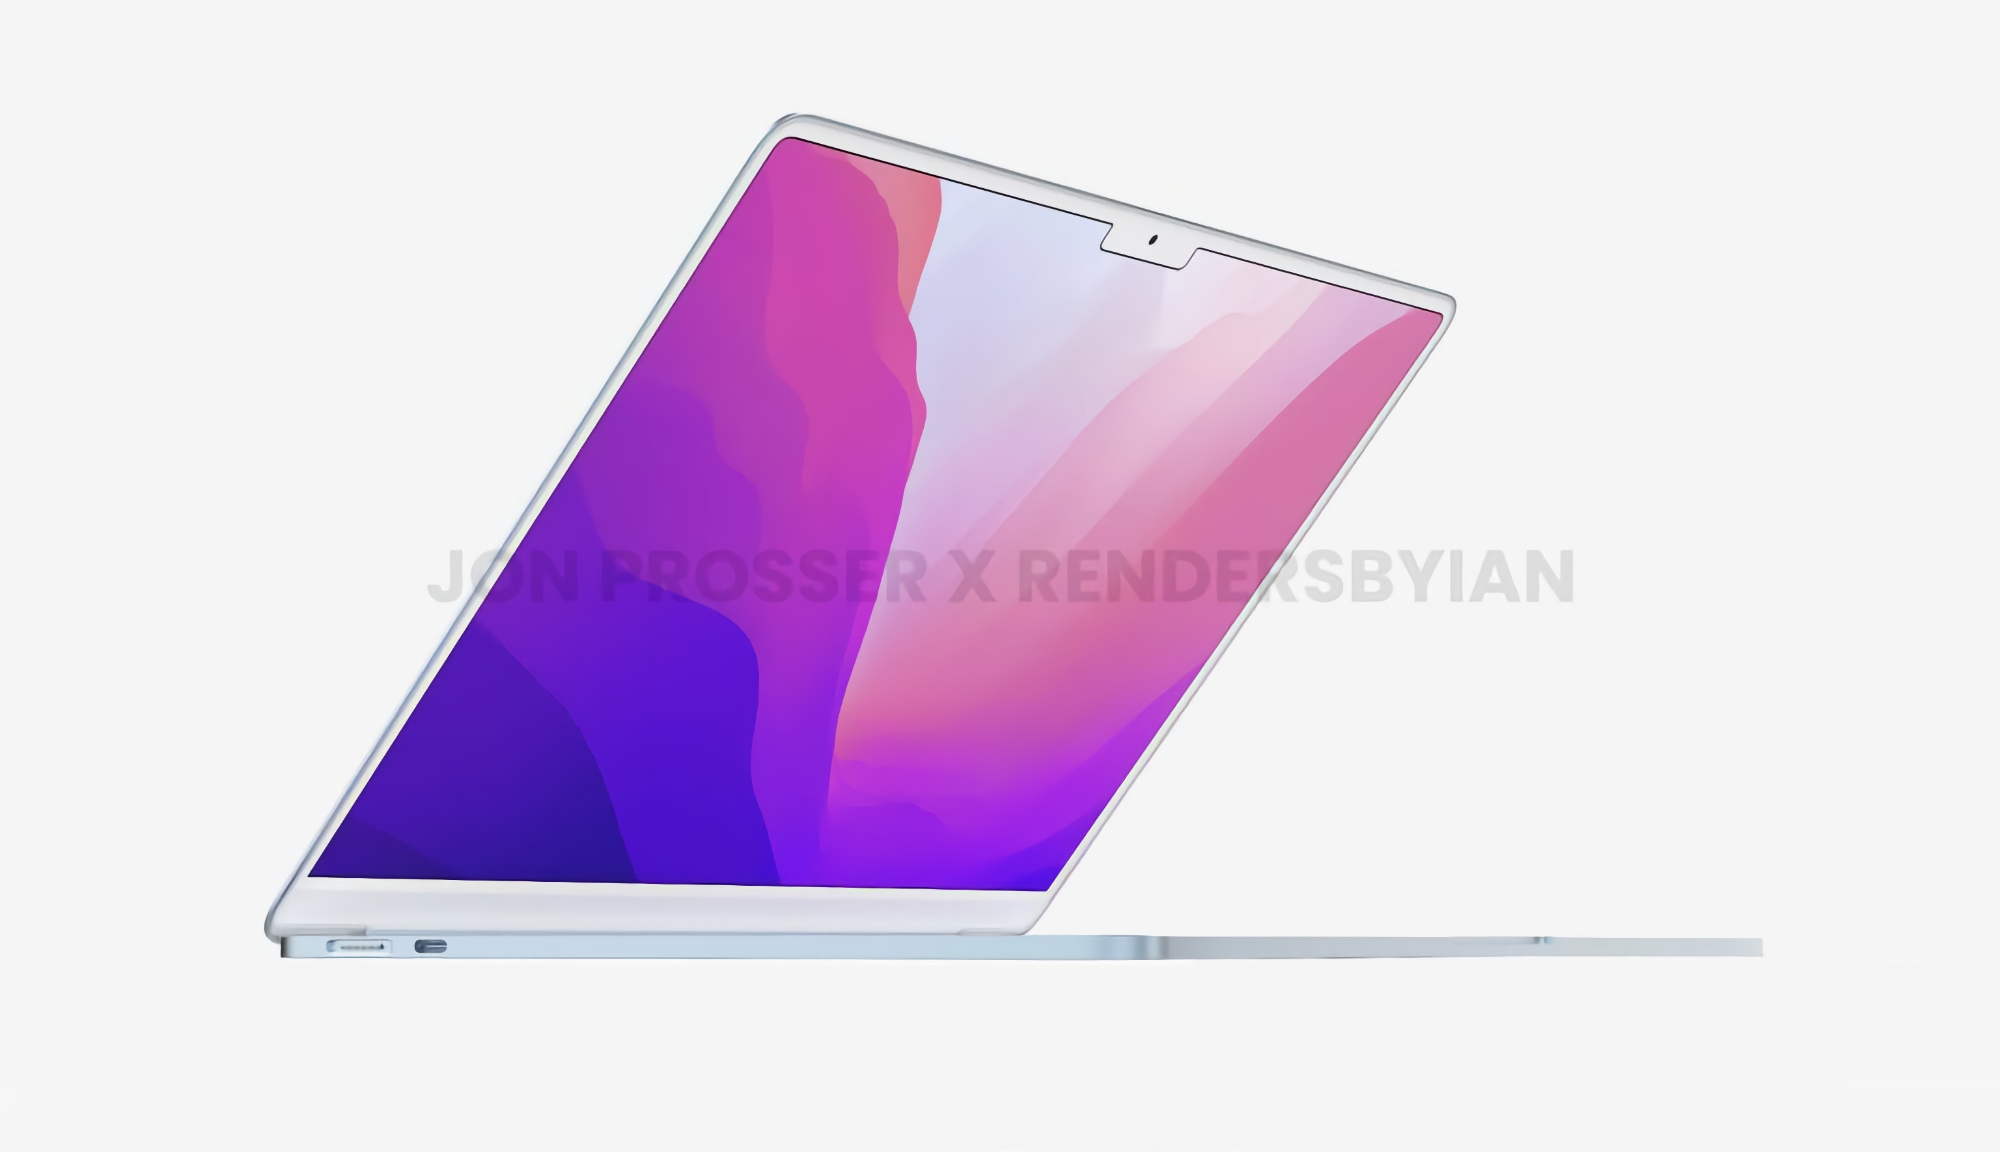 John Prosser revealed the design of the new MacBook Air with a white frame around the screen and "bangs" like the MacBook Pro and iPhone